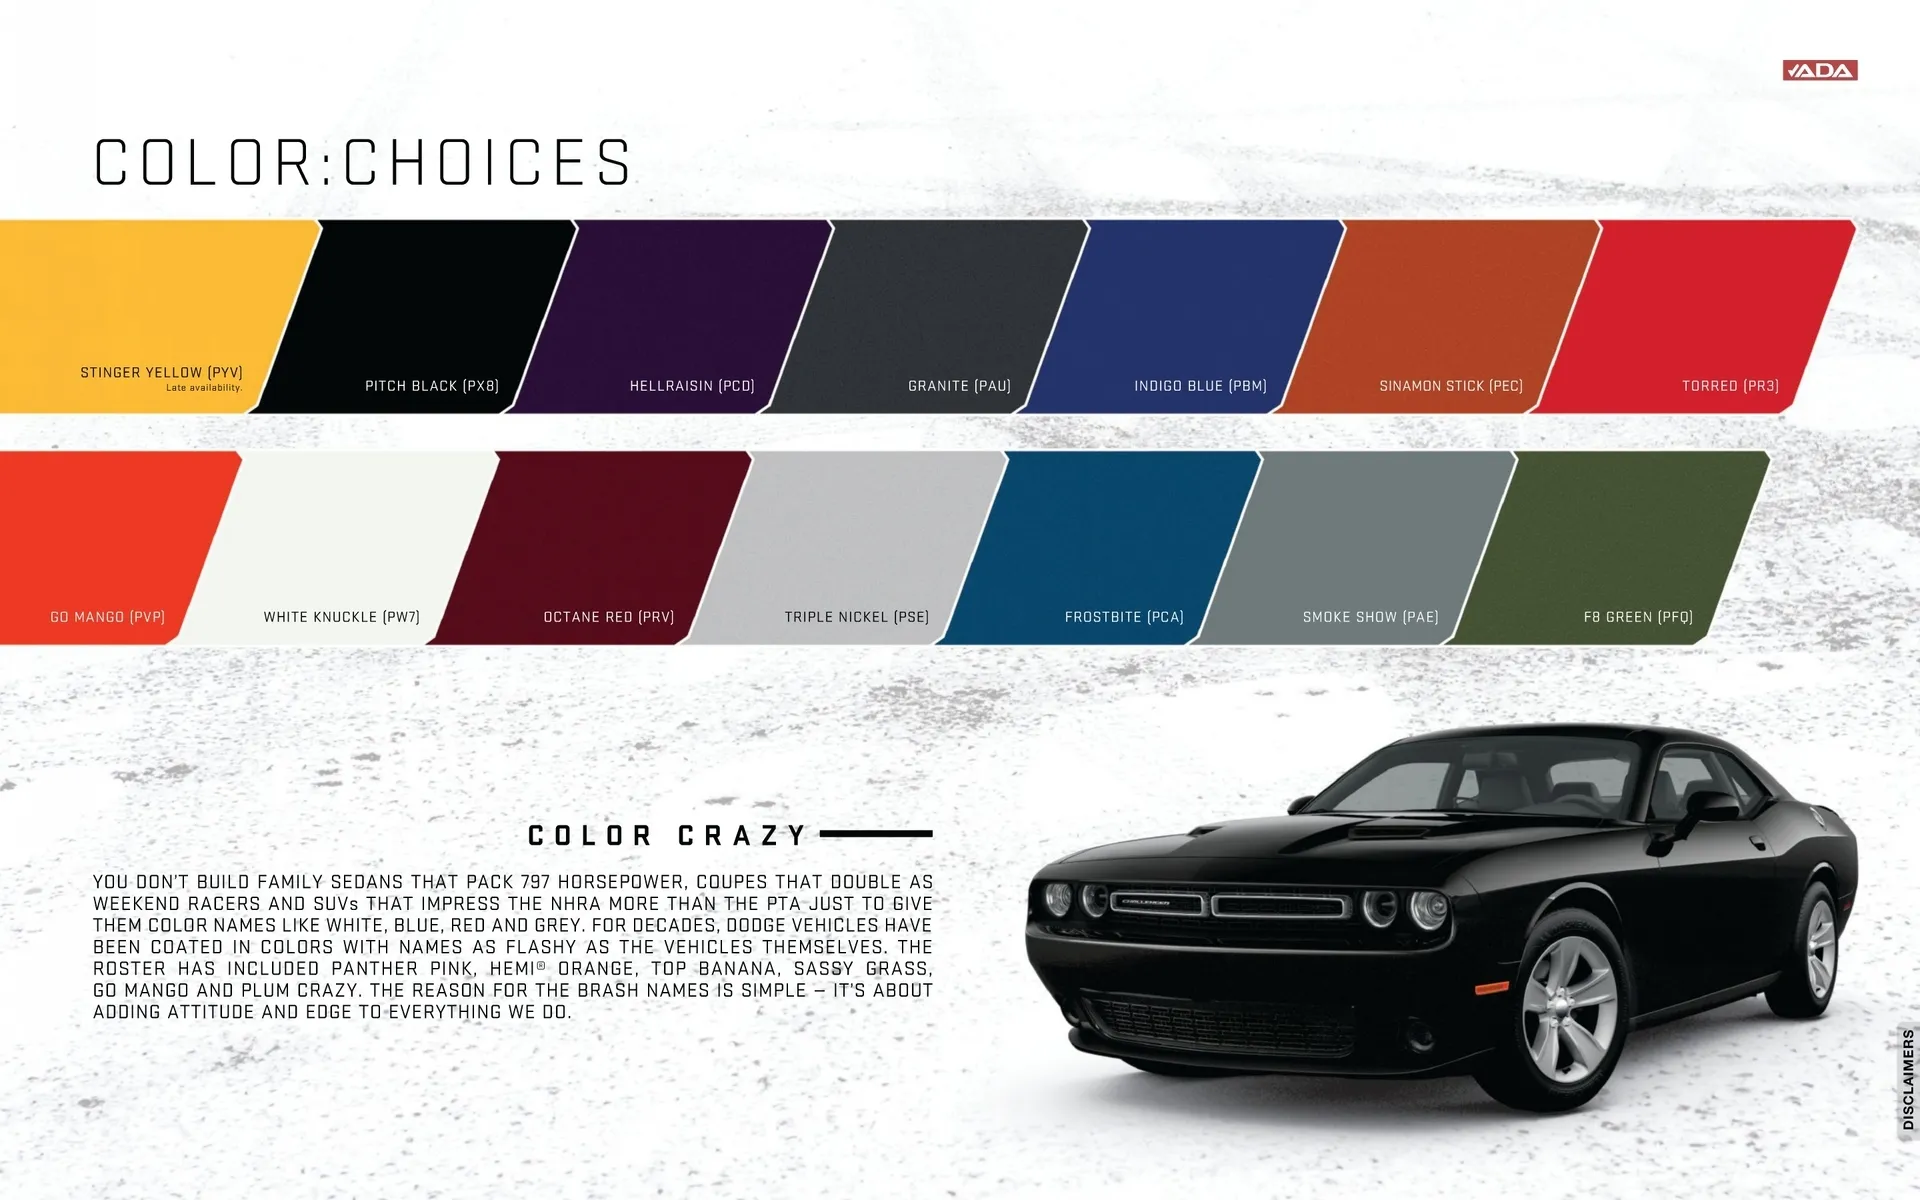 paint color examples along with ordering codes for exterior colors of the Dodge Challenger